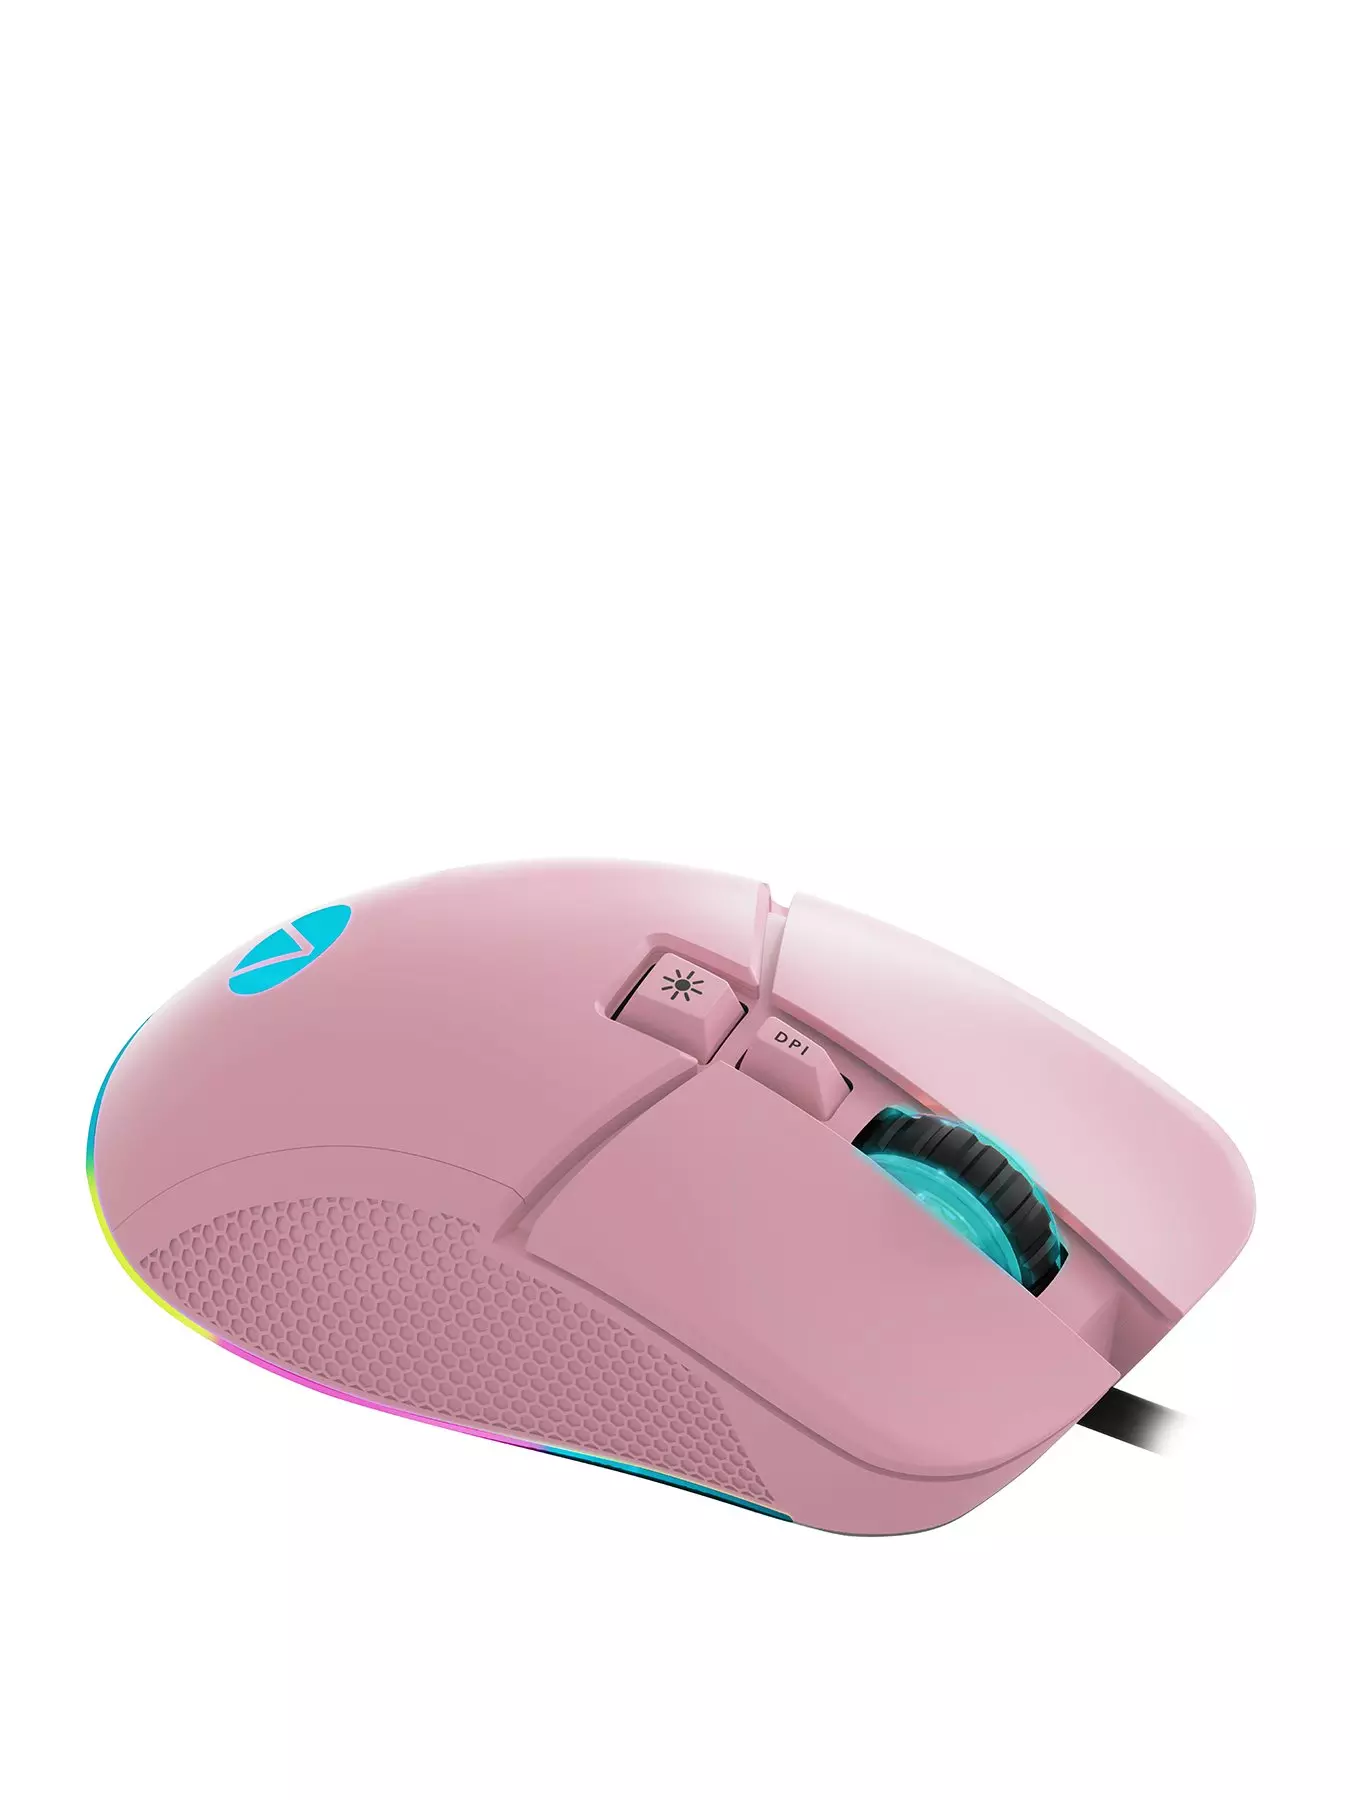 HyperX Pulsefire Haste – Gaming Mouse – Ultra-Lightweight, 60g, Honeycomb  Shell, Hex Design, HyperFlex USB Cable, Up to 16000 DPI, 6 Programmable